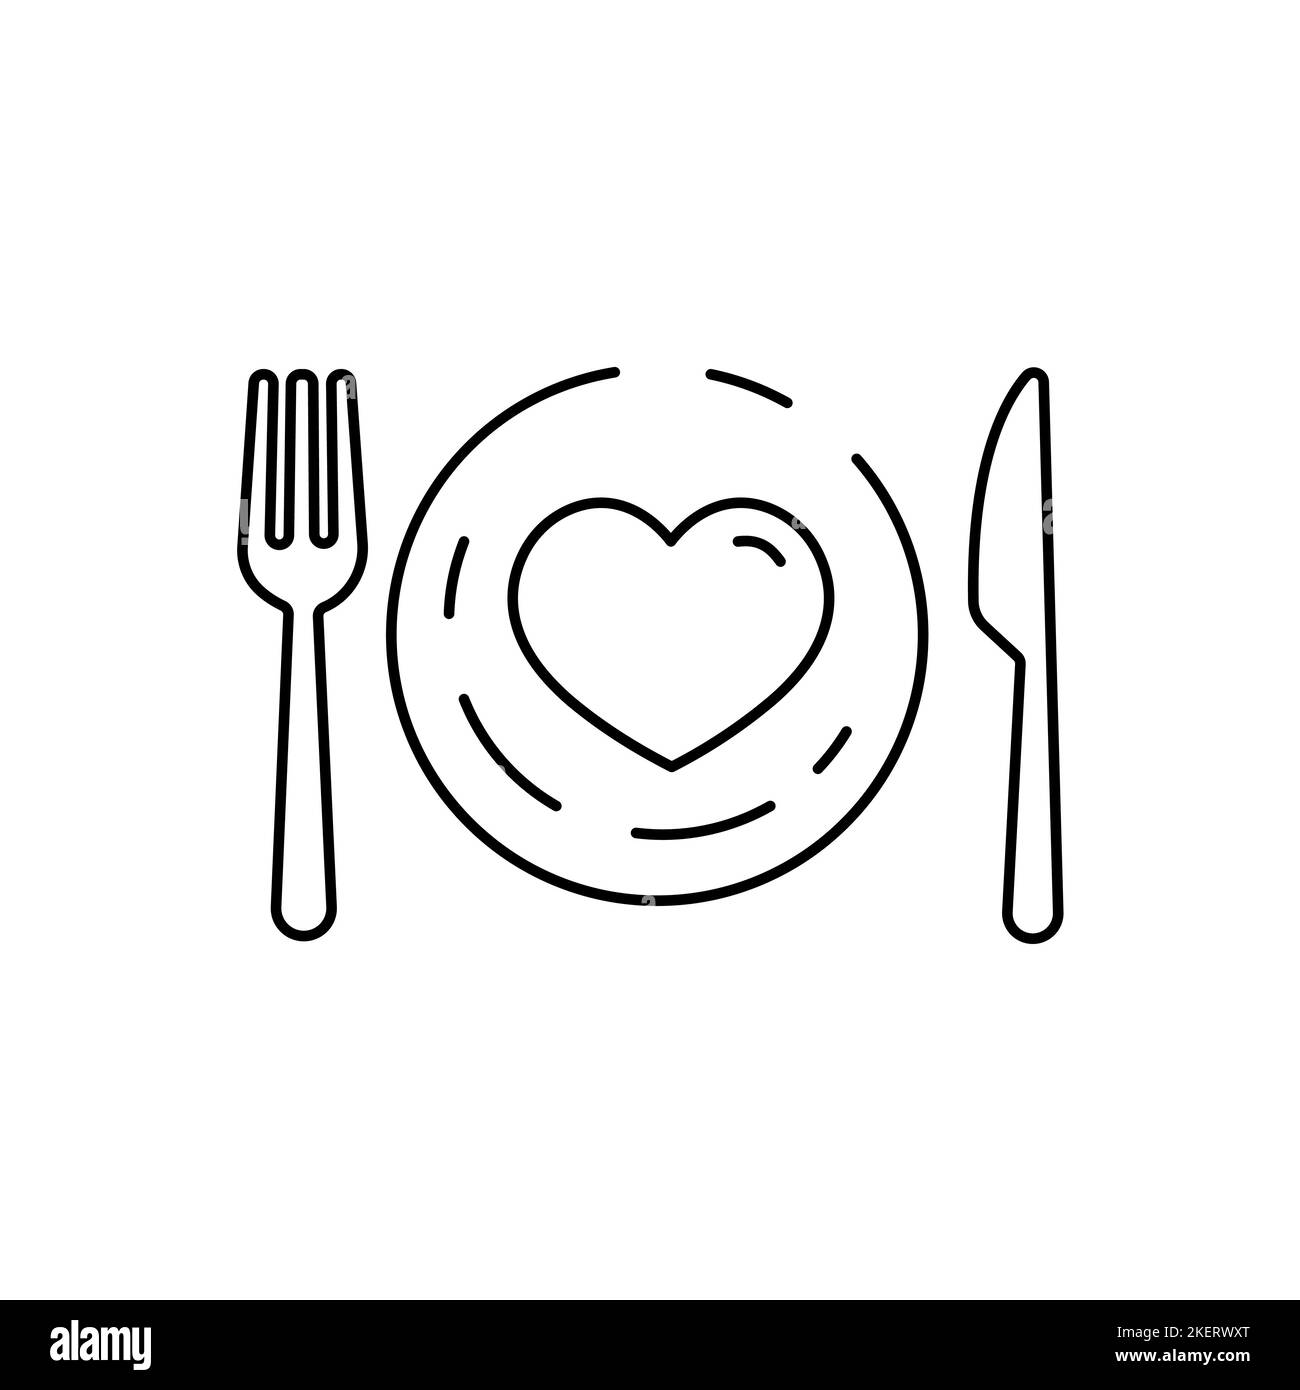 Love plate vector icon in linear, outline icon isolated on white background Stock Vector